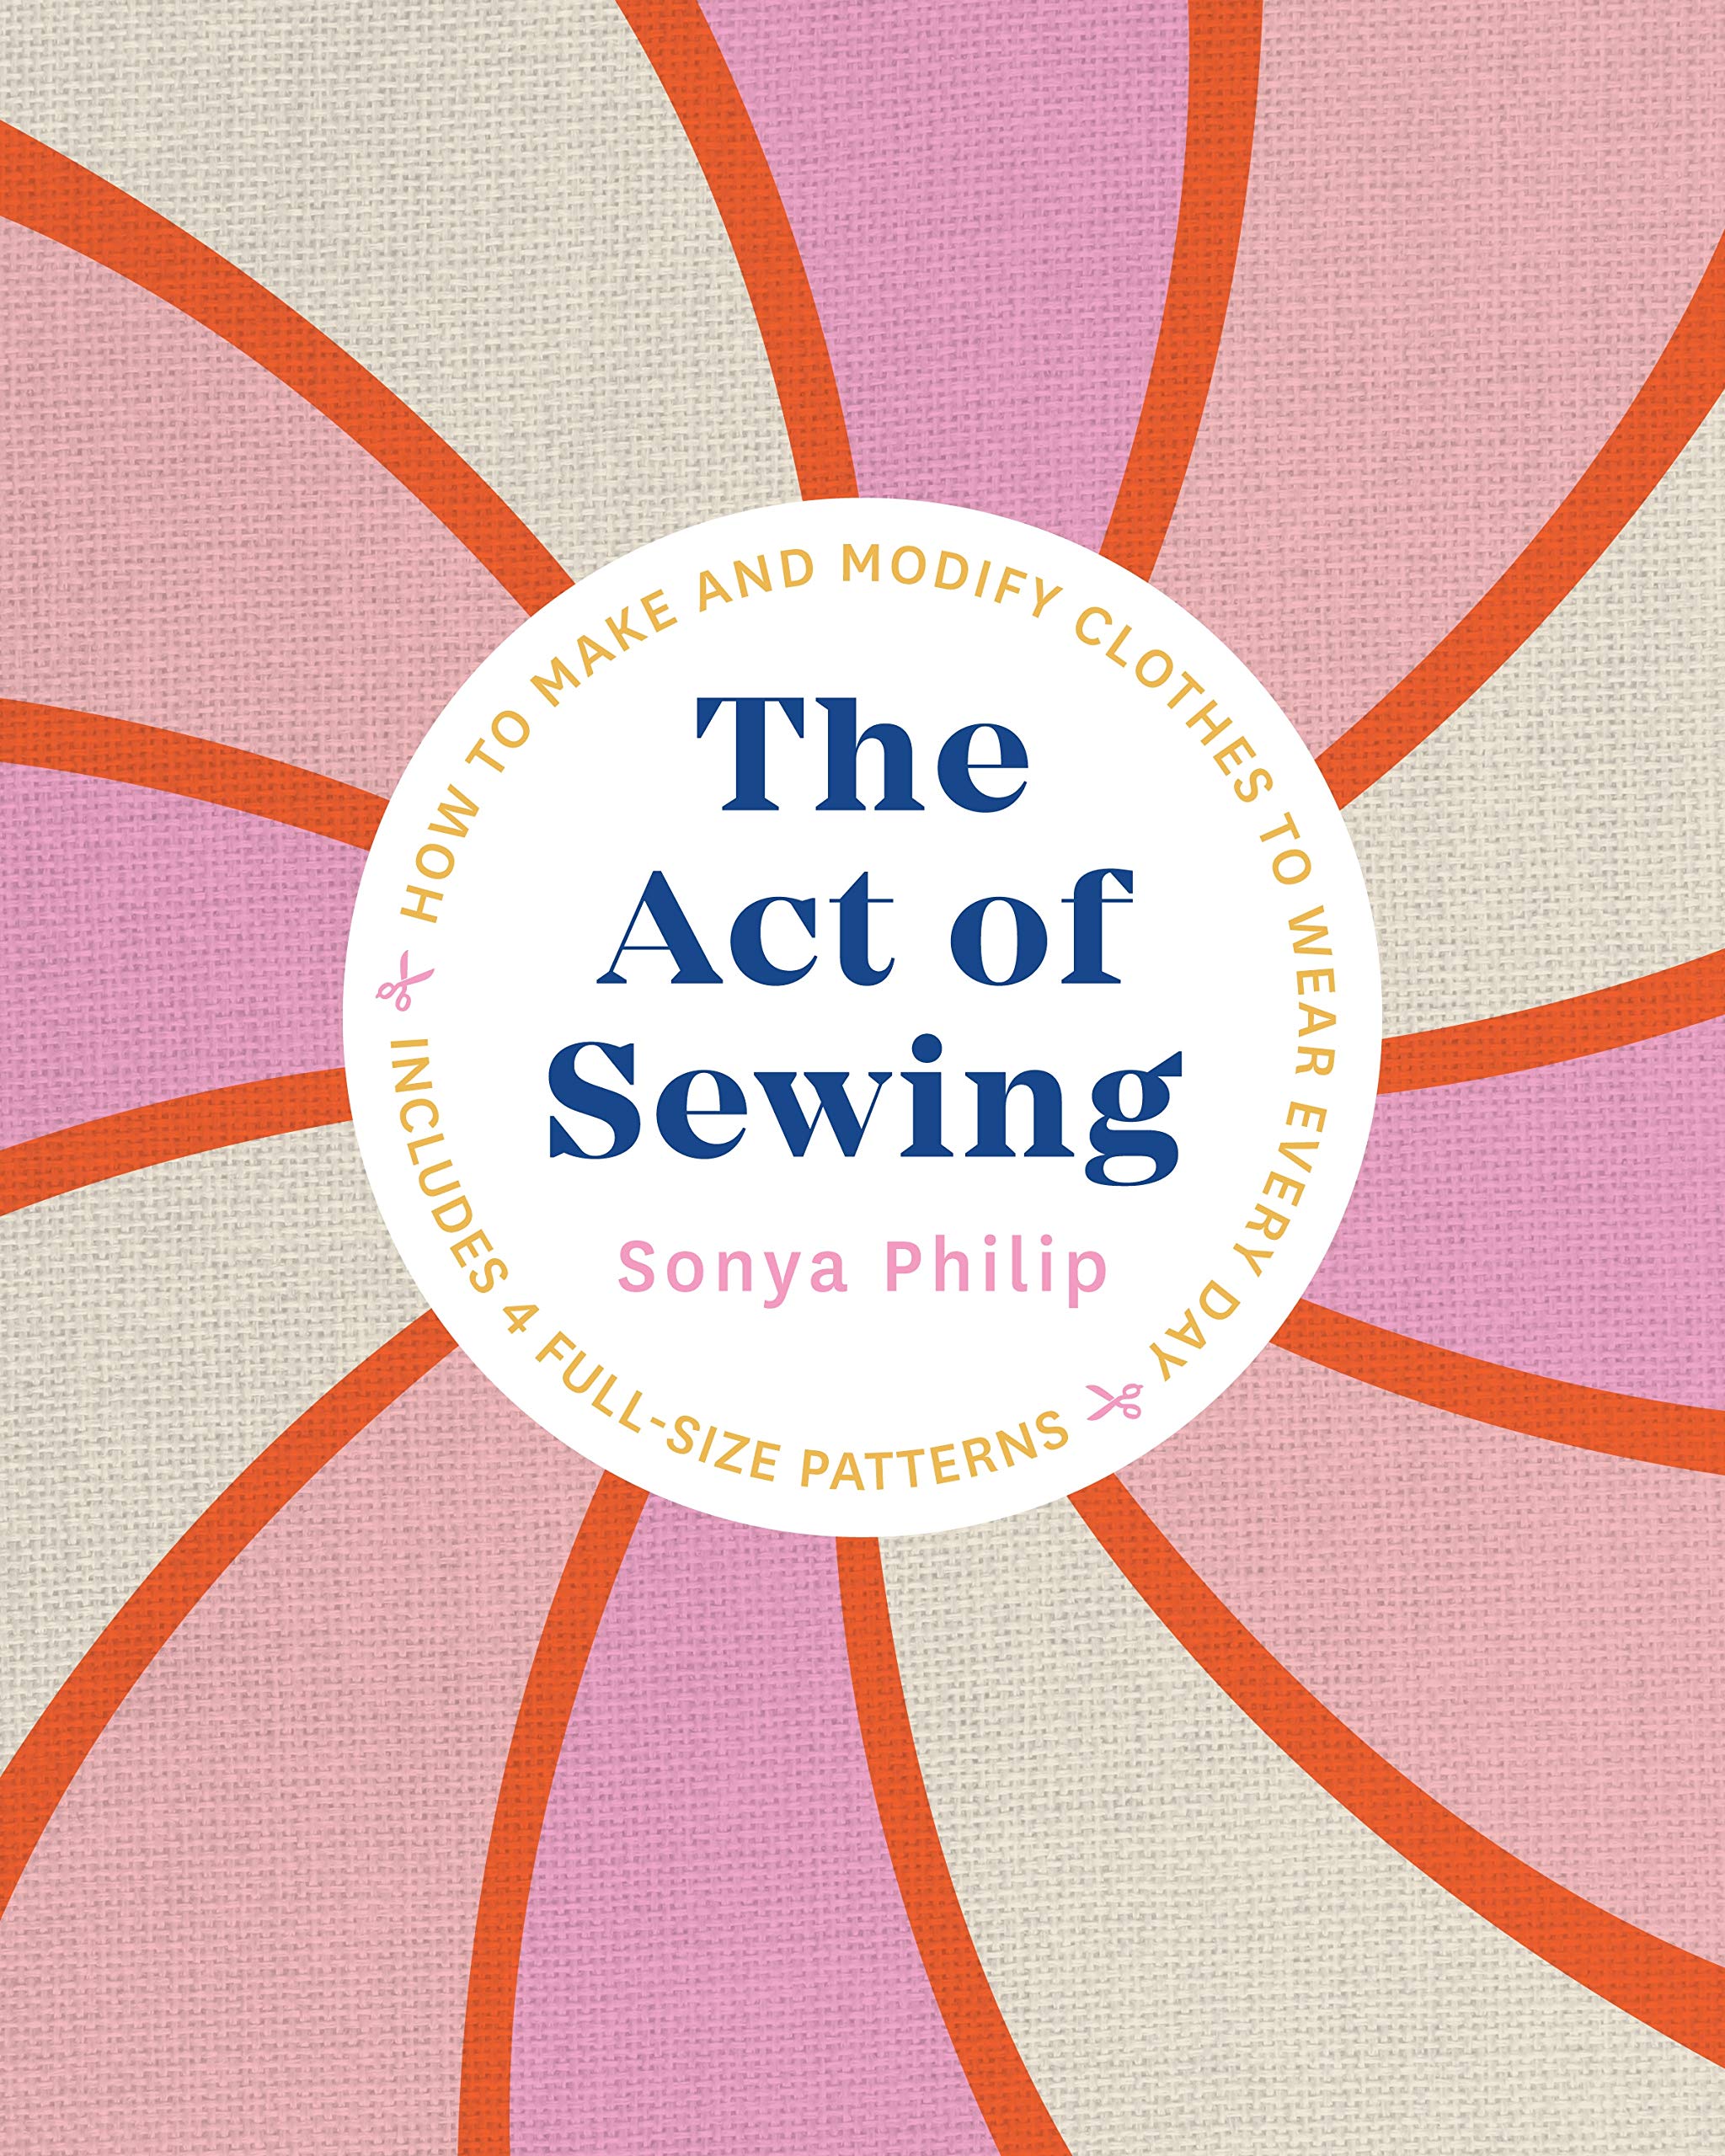 The Act of Sewing: How To Make and Modify Clothes To Wear Every Day